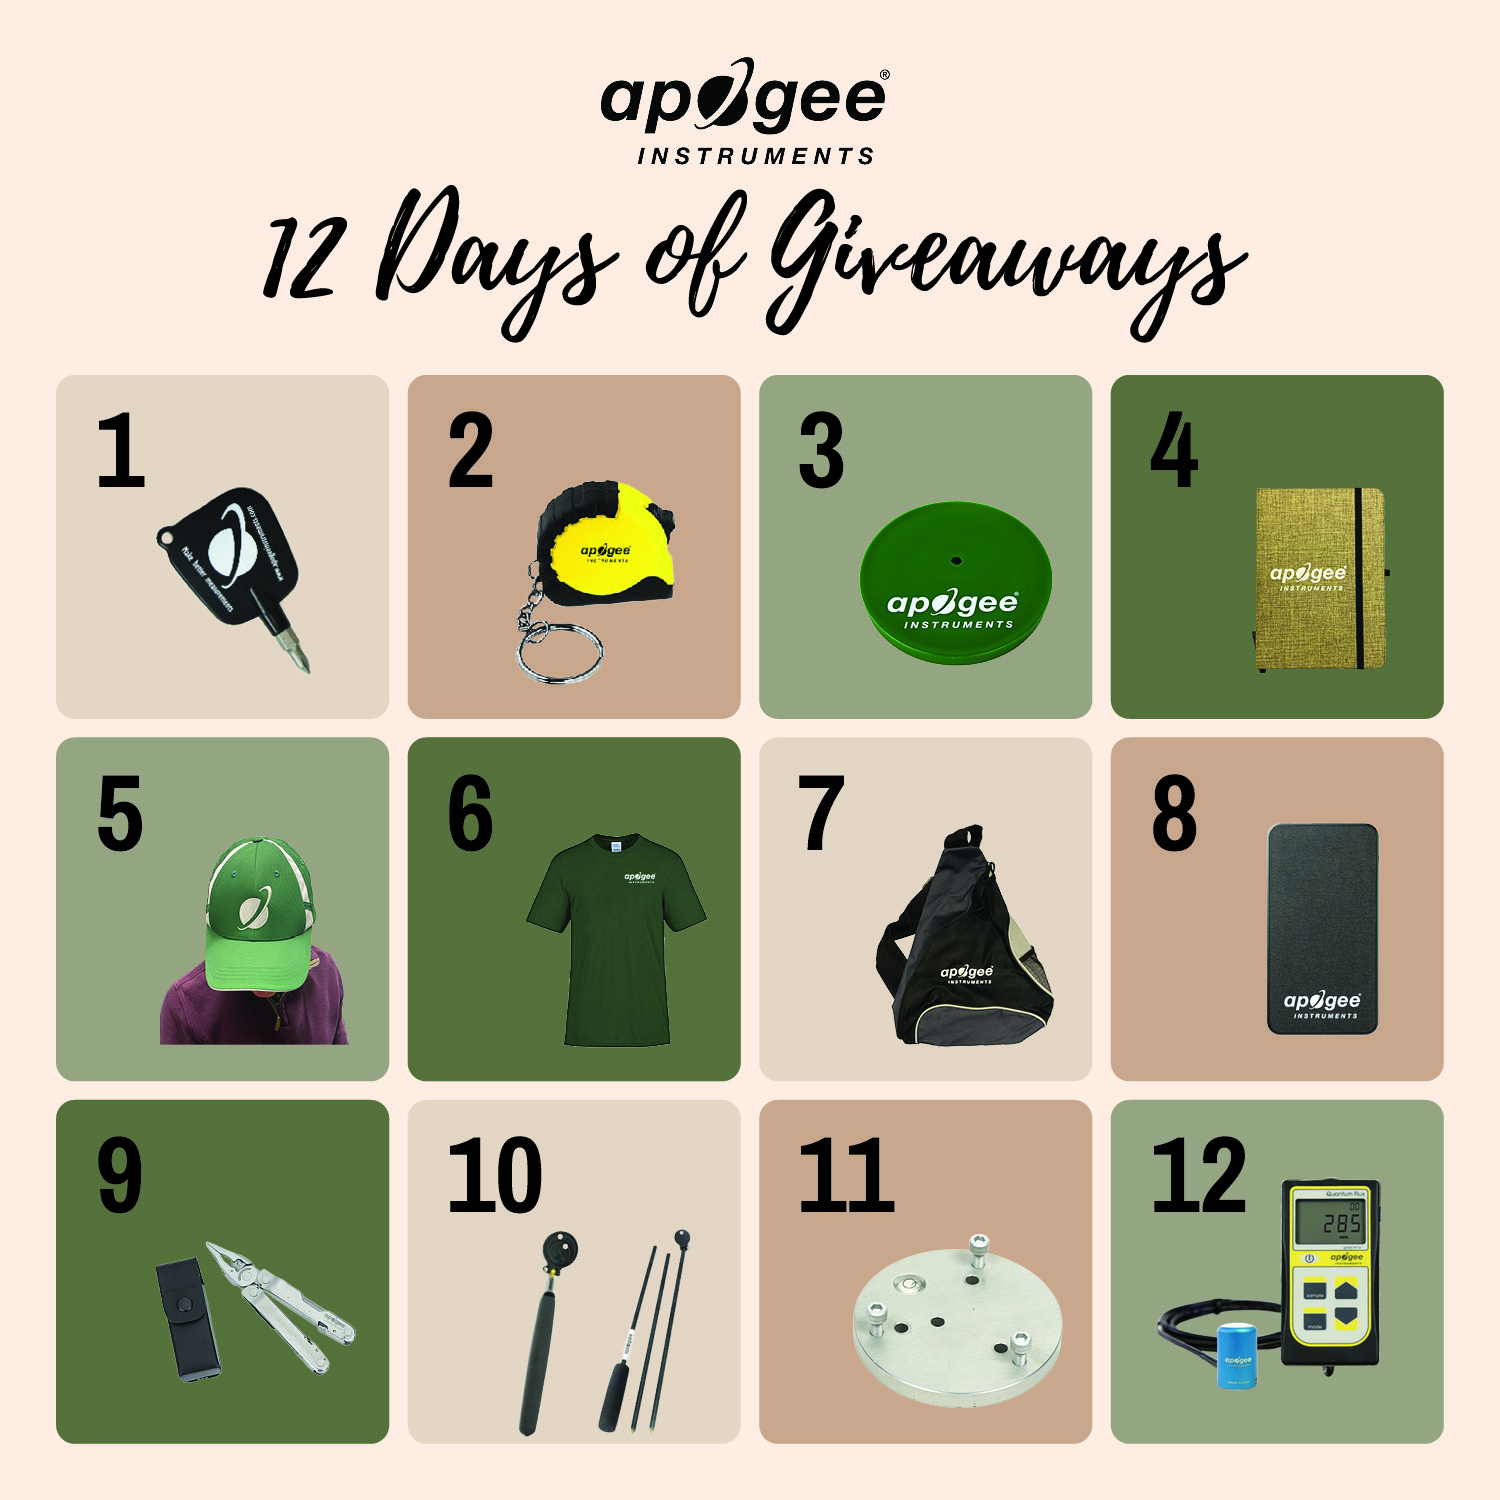 All prizes of 12 Days of Giveaways